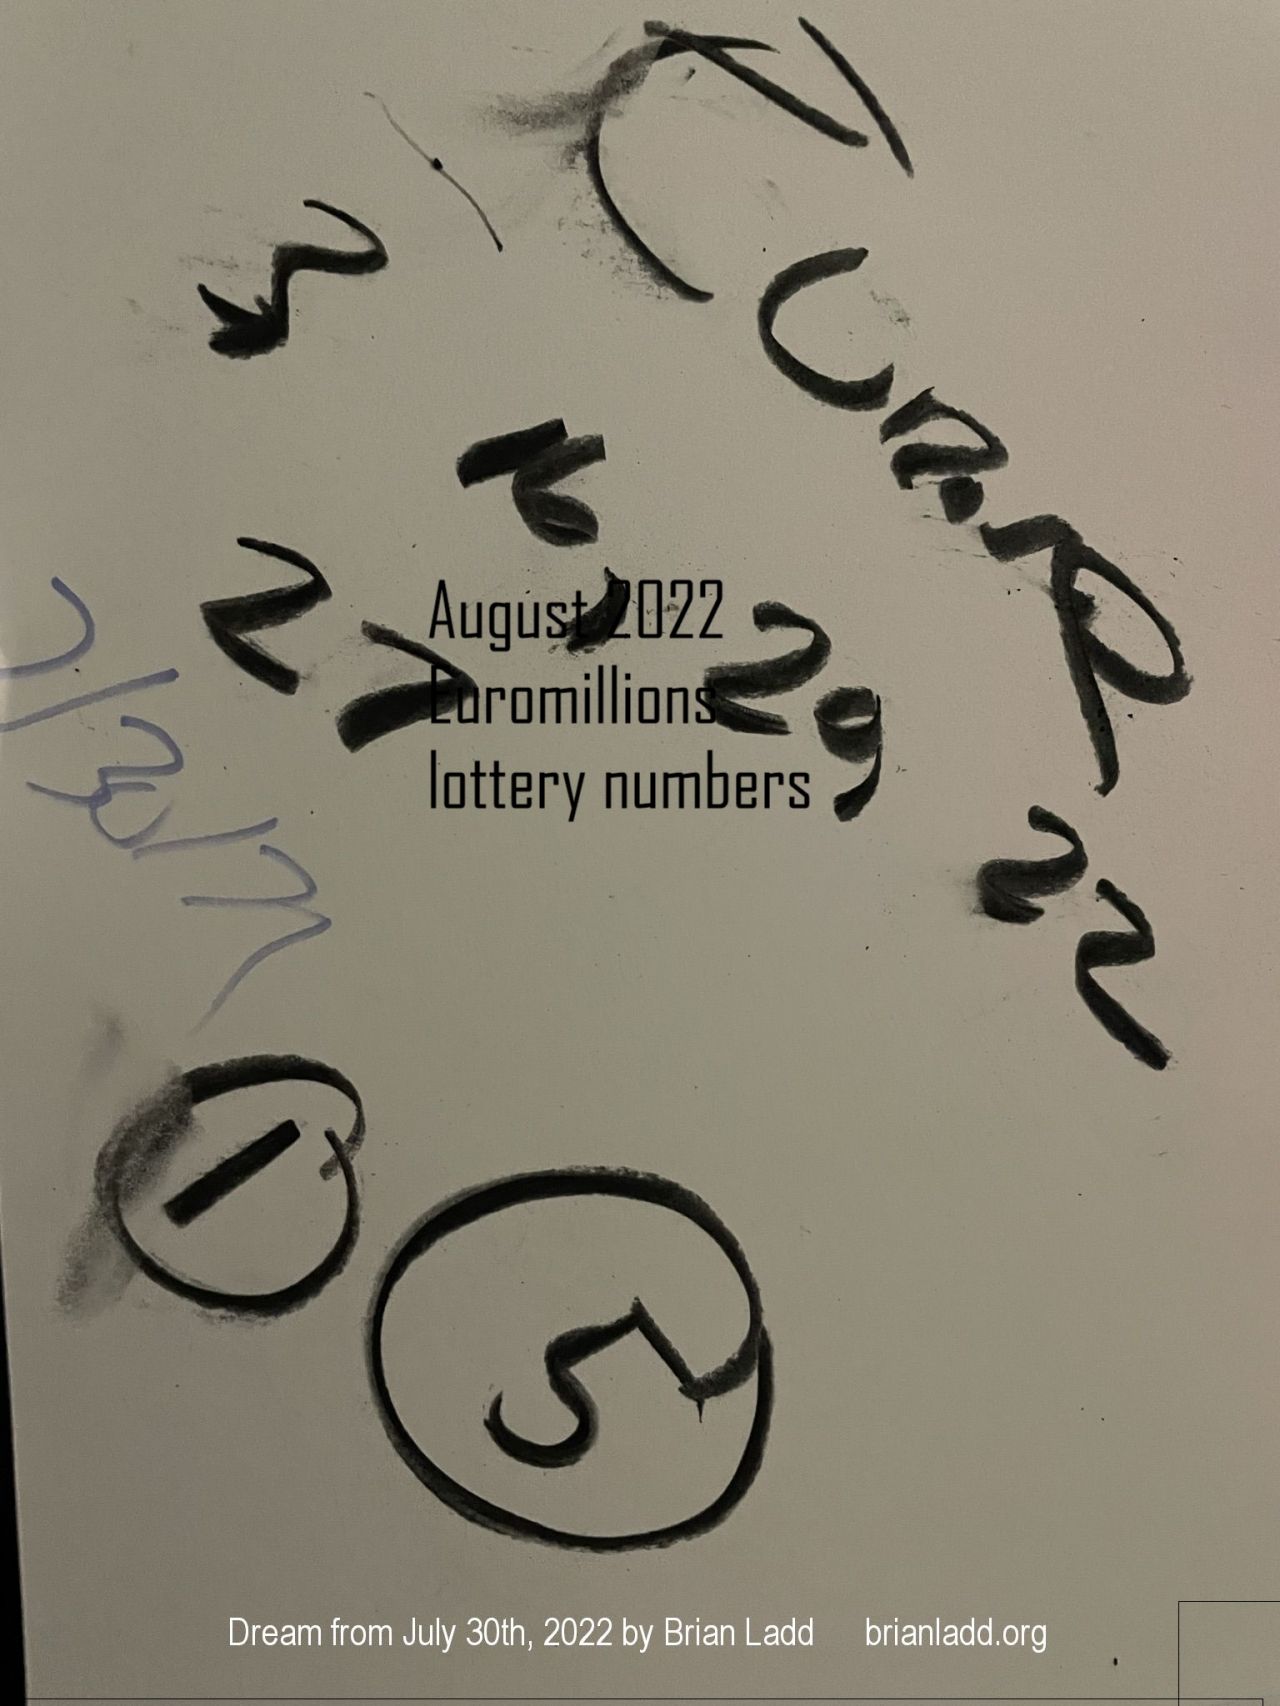 30 July 2022 1  August 2022 Euromillions lottery numbers...
August 2022 Euromillions lottery numbers.
